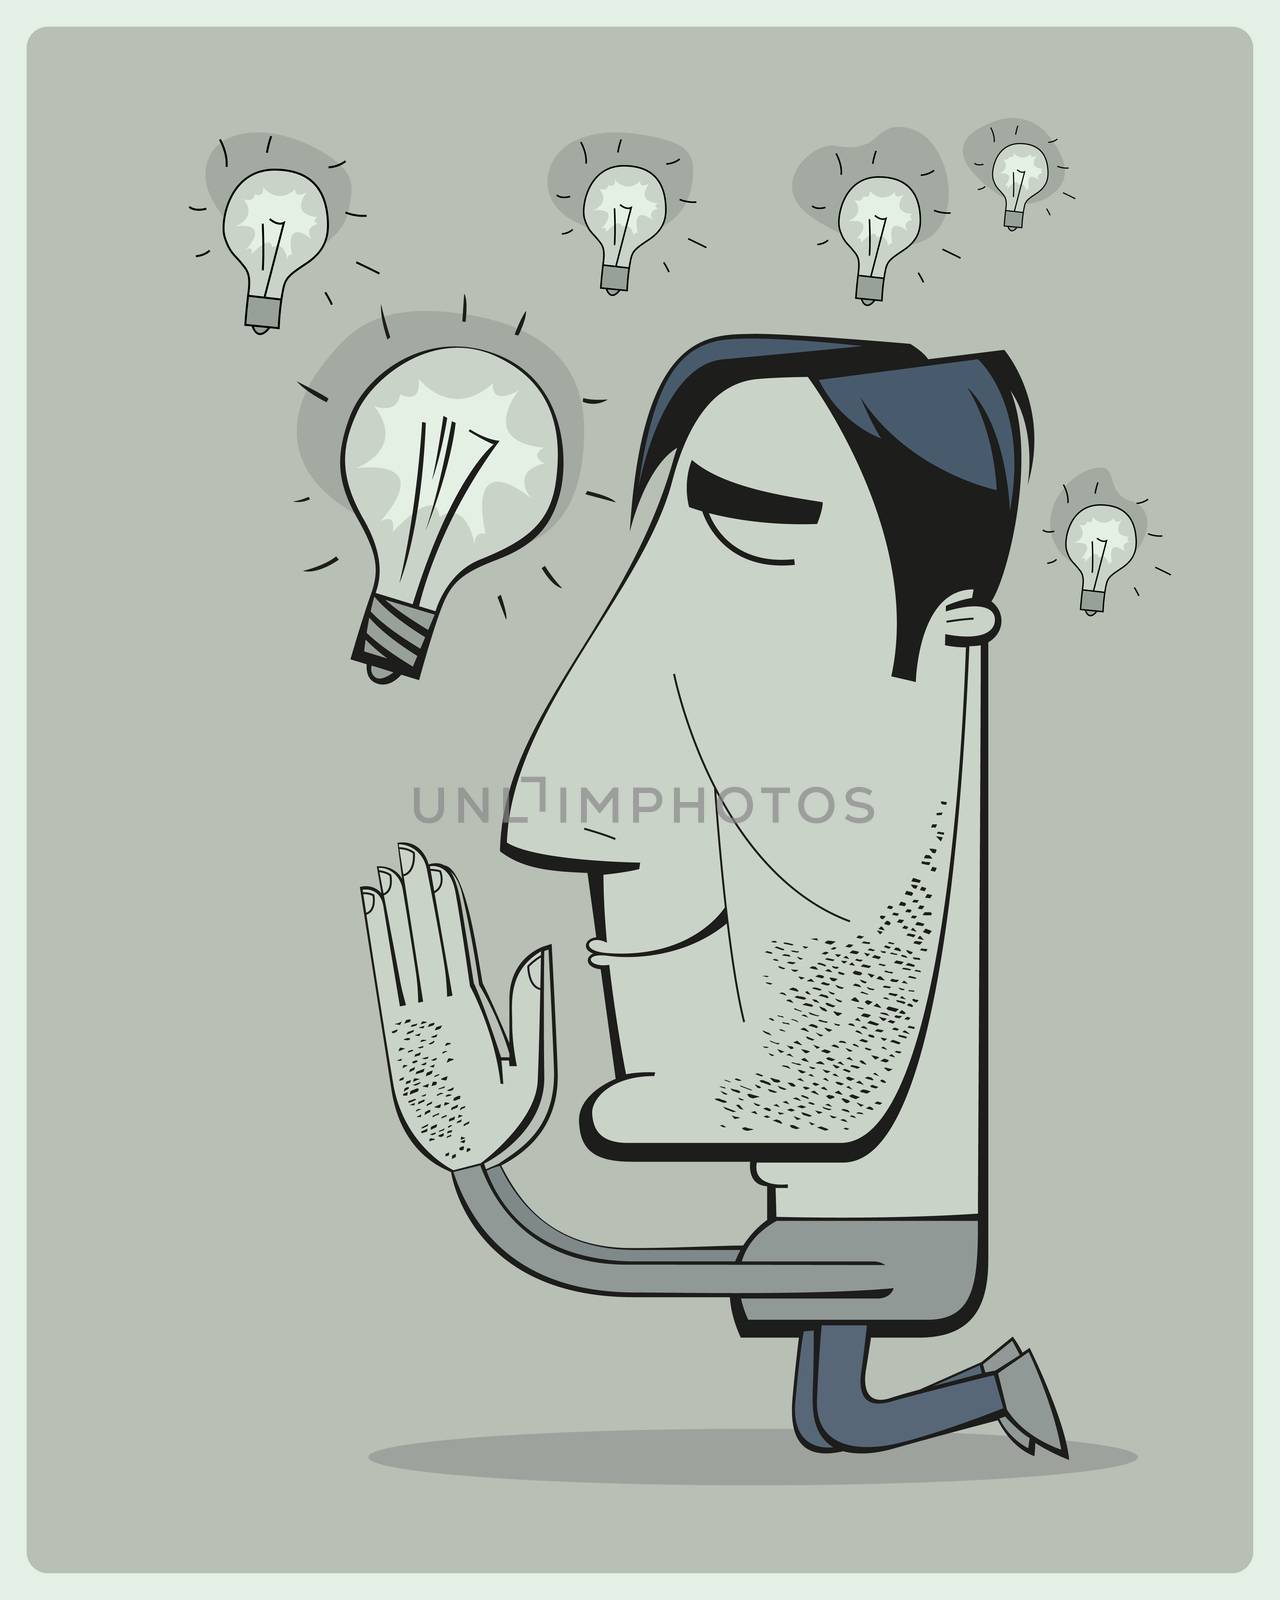 Positive thinking businessman is praying for new ideas by imagining the abundance of ideas falling from the sky in the shape of bright light-bulbs